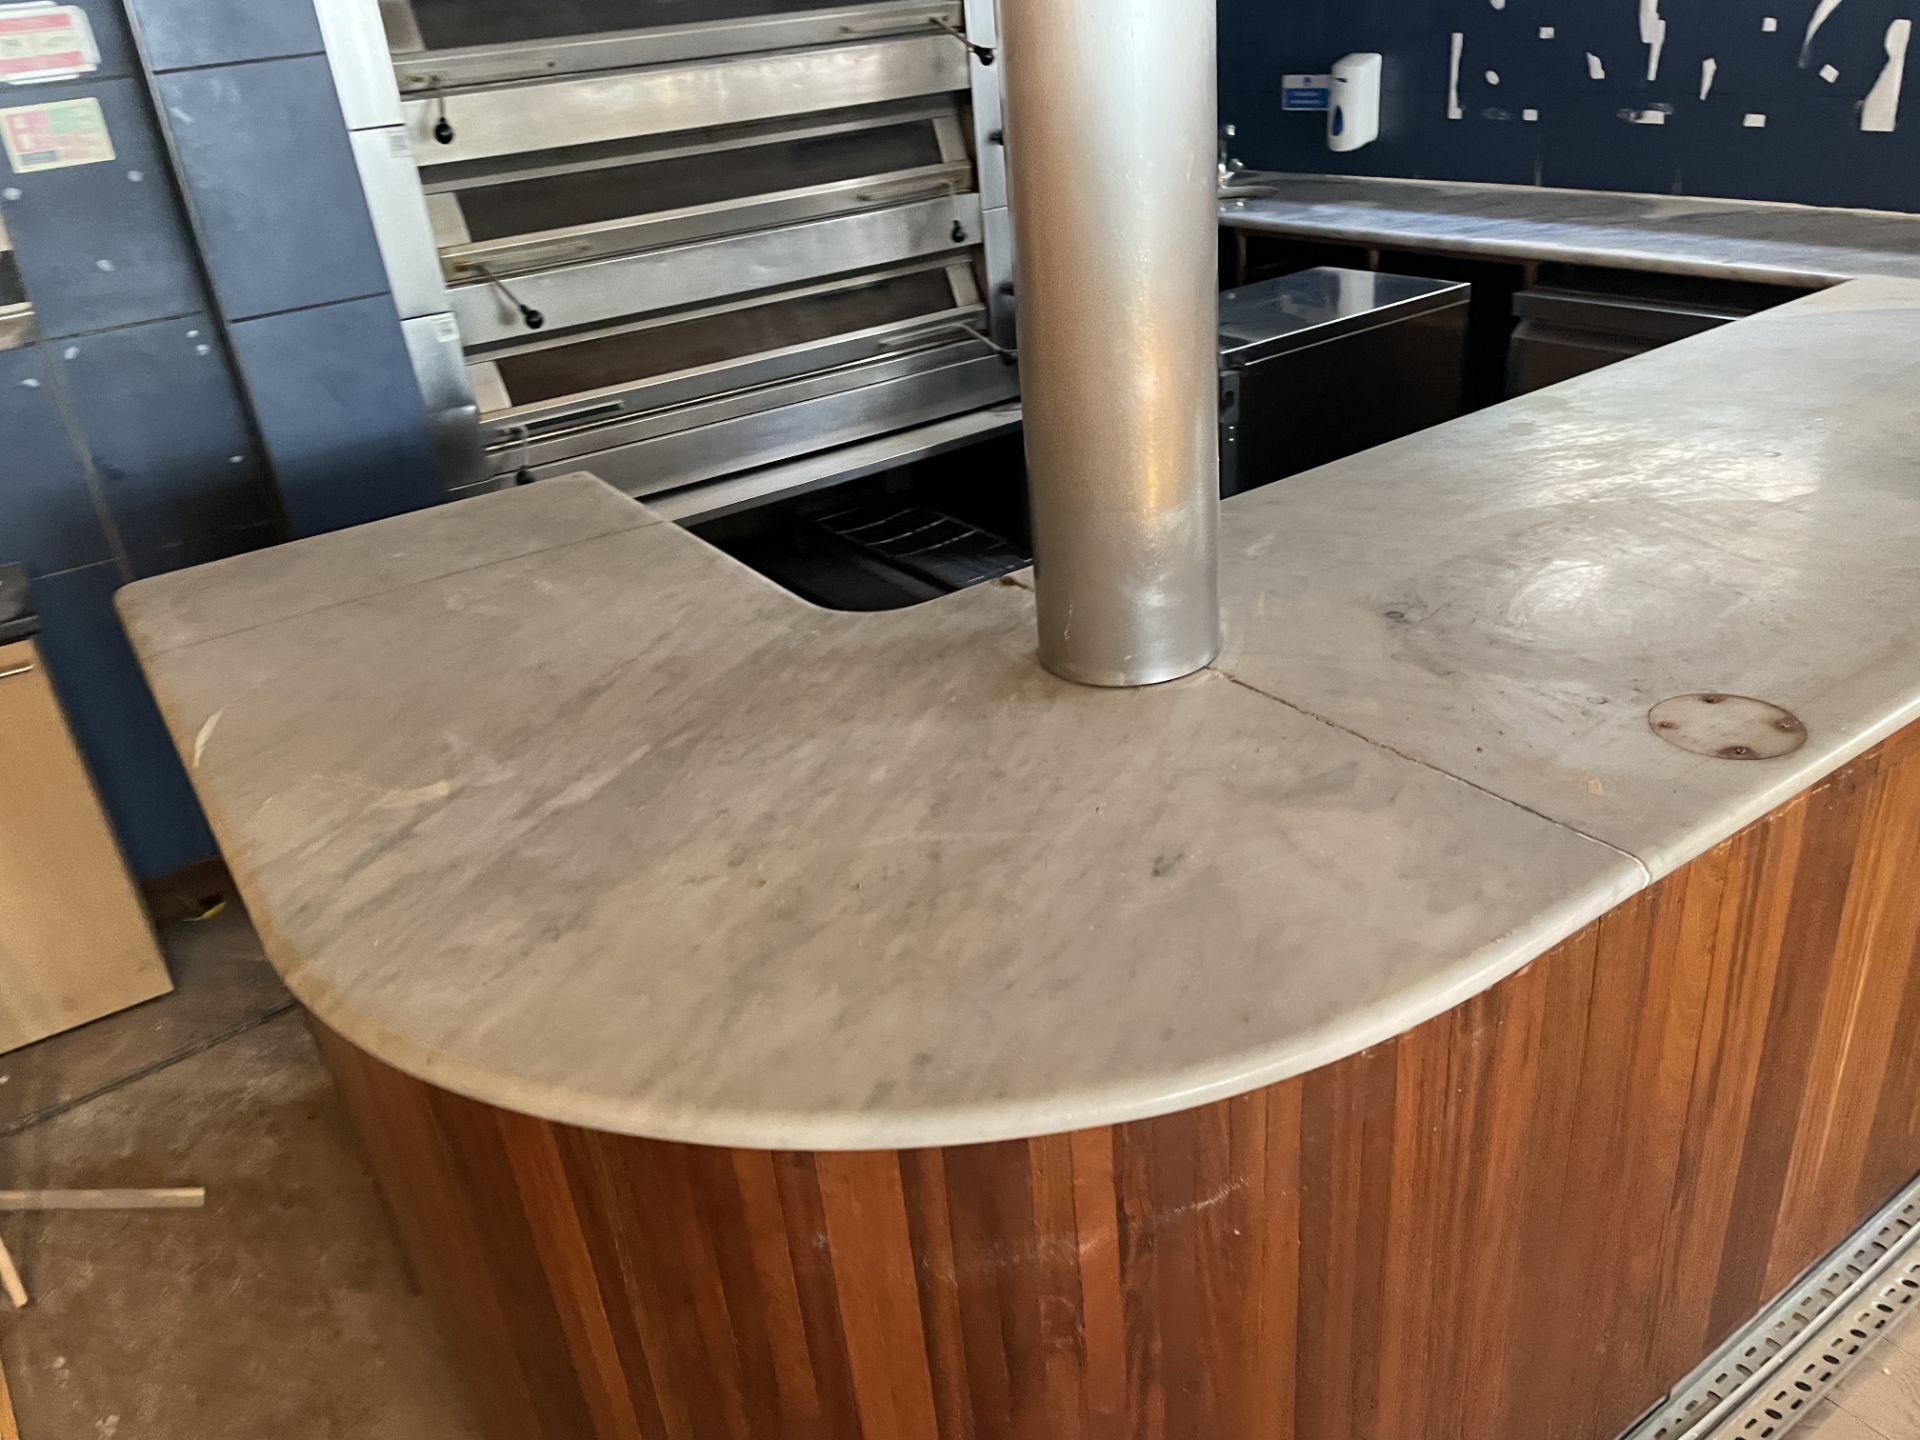 1 x Restaurant Service Bar Featuring Marble Top, Wood Panel Fascia and Rear Prep Area With Hand Wash - Image 3 of 15